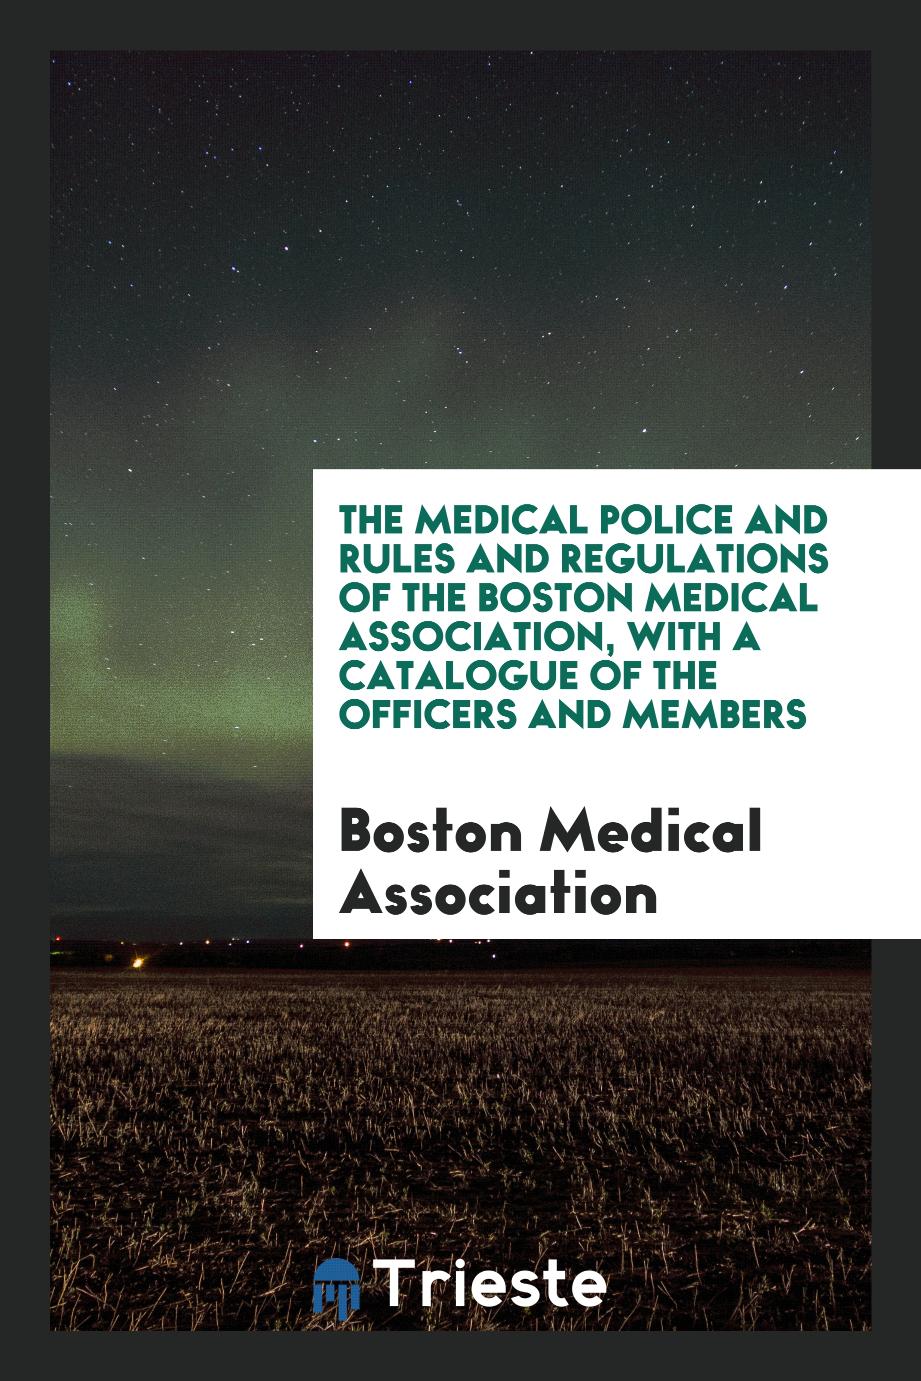 The Medical police and rules and regulations of the Boston Medical Association, with a Catalogue of the officers and members